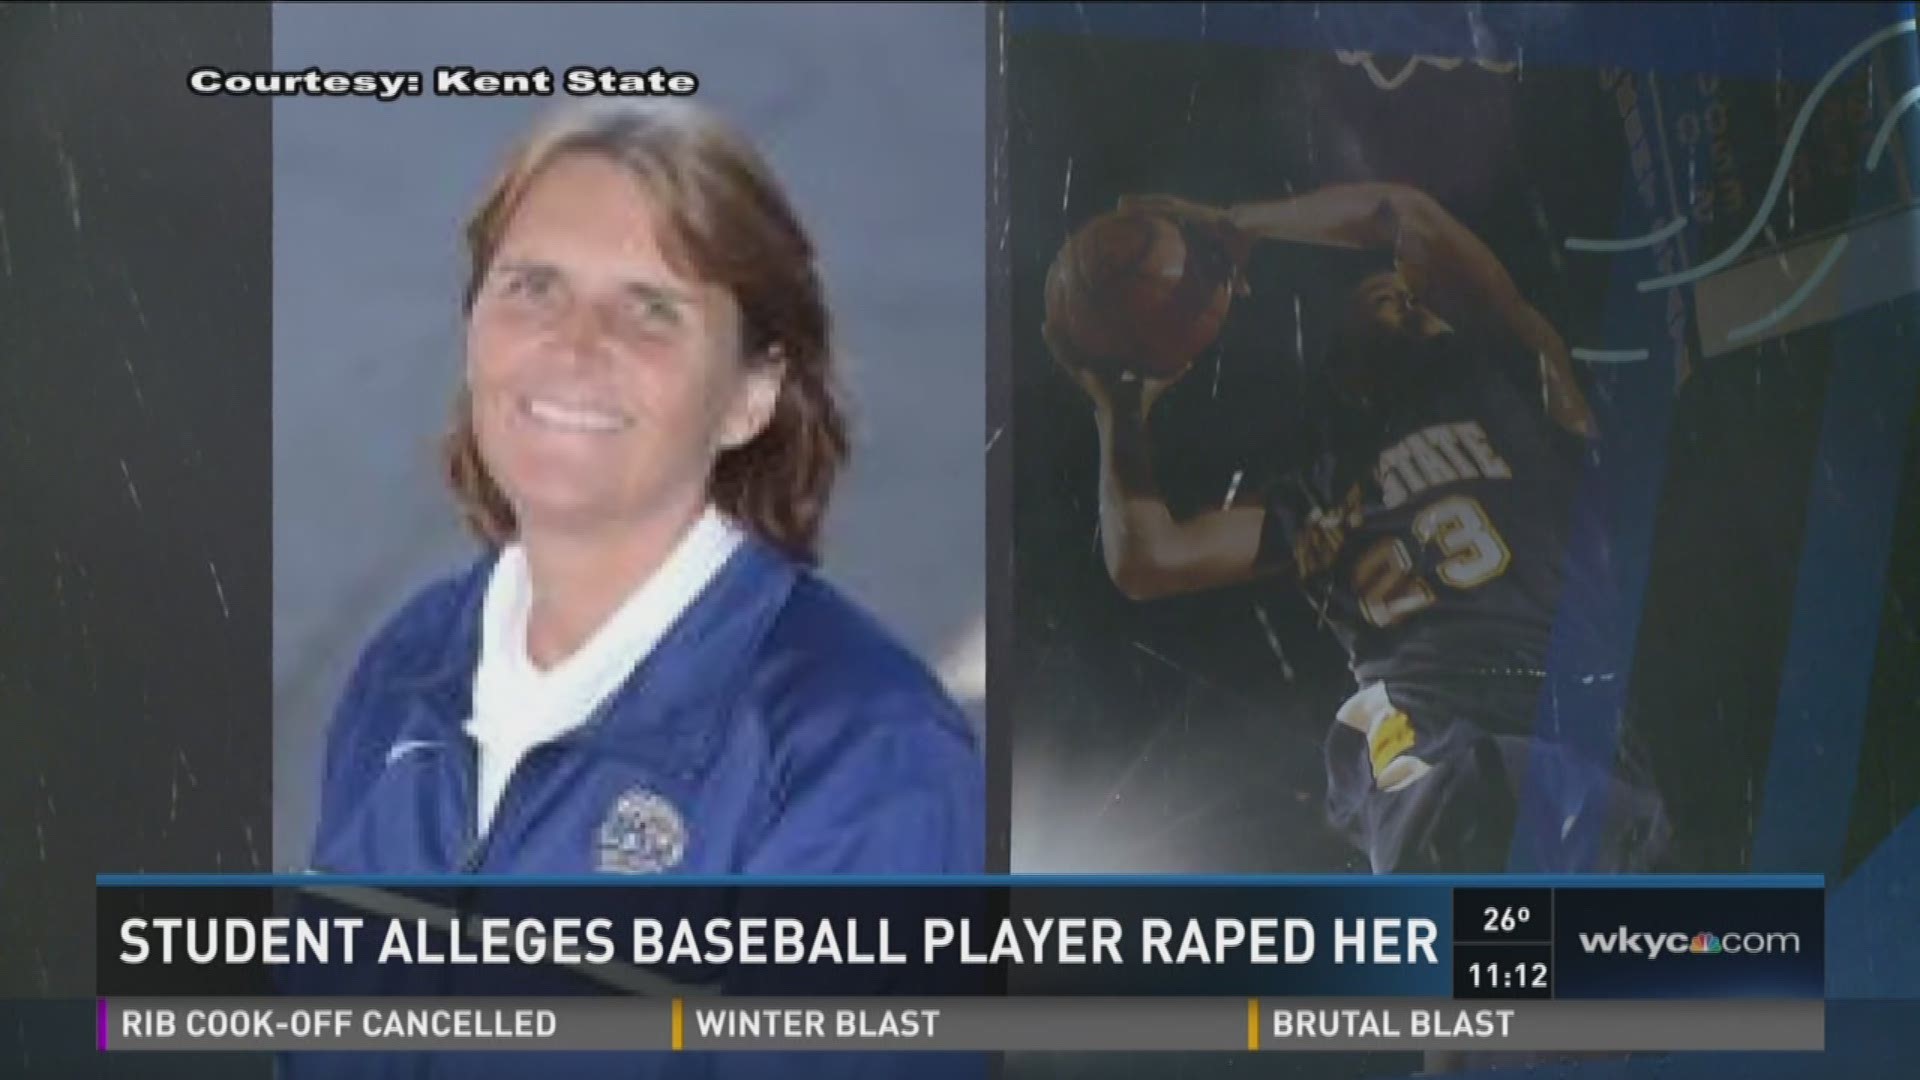 Karen Linder, former head coach of the varsity softball team, remains at the center of an alleged rape cover-up involving her son.